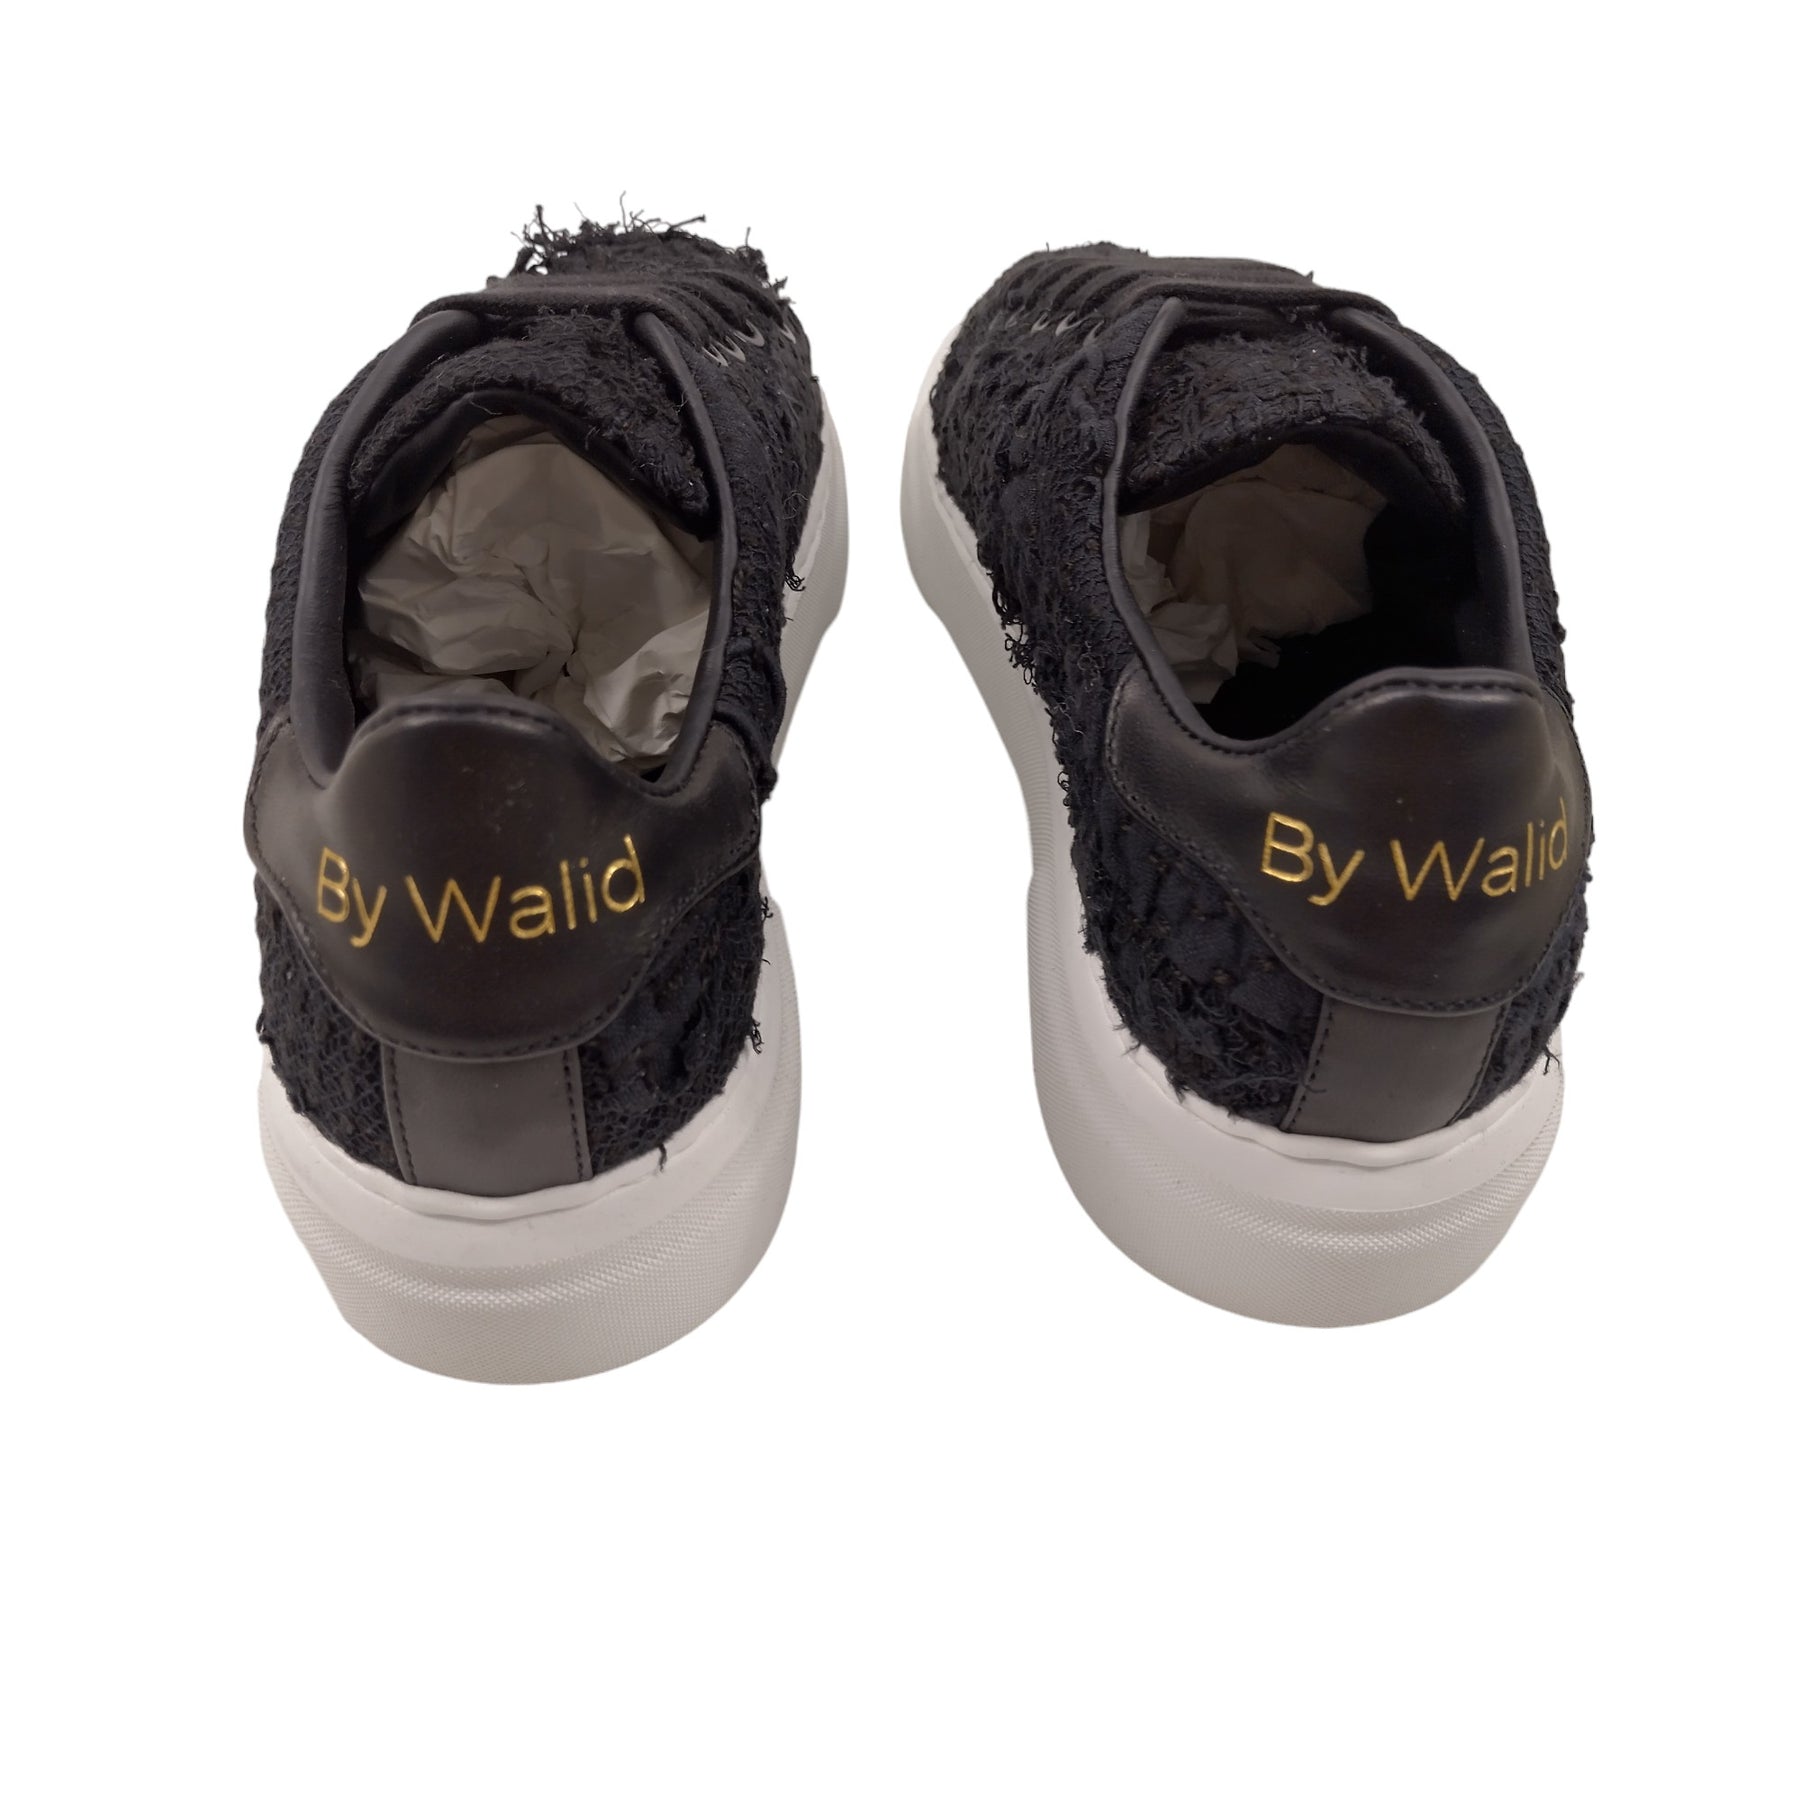 By Walid Black Lace Sneakers